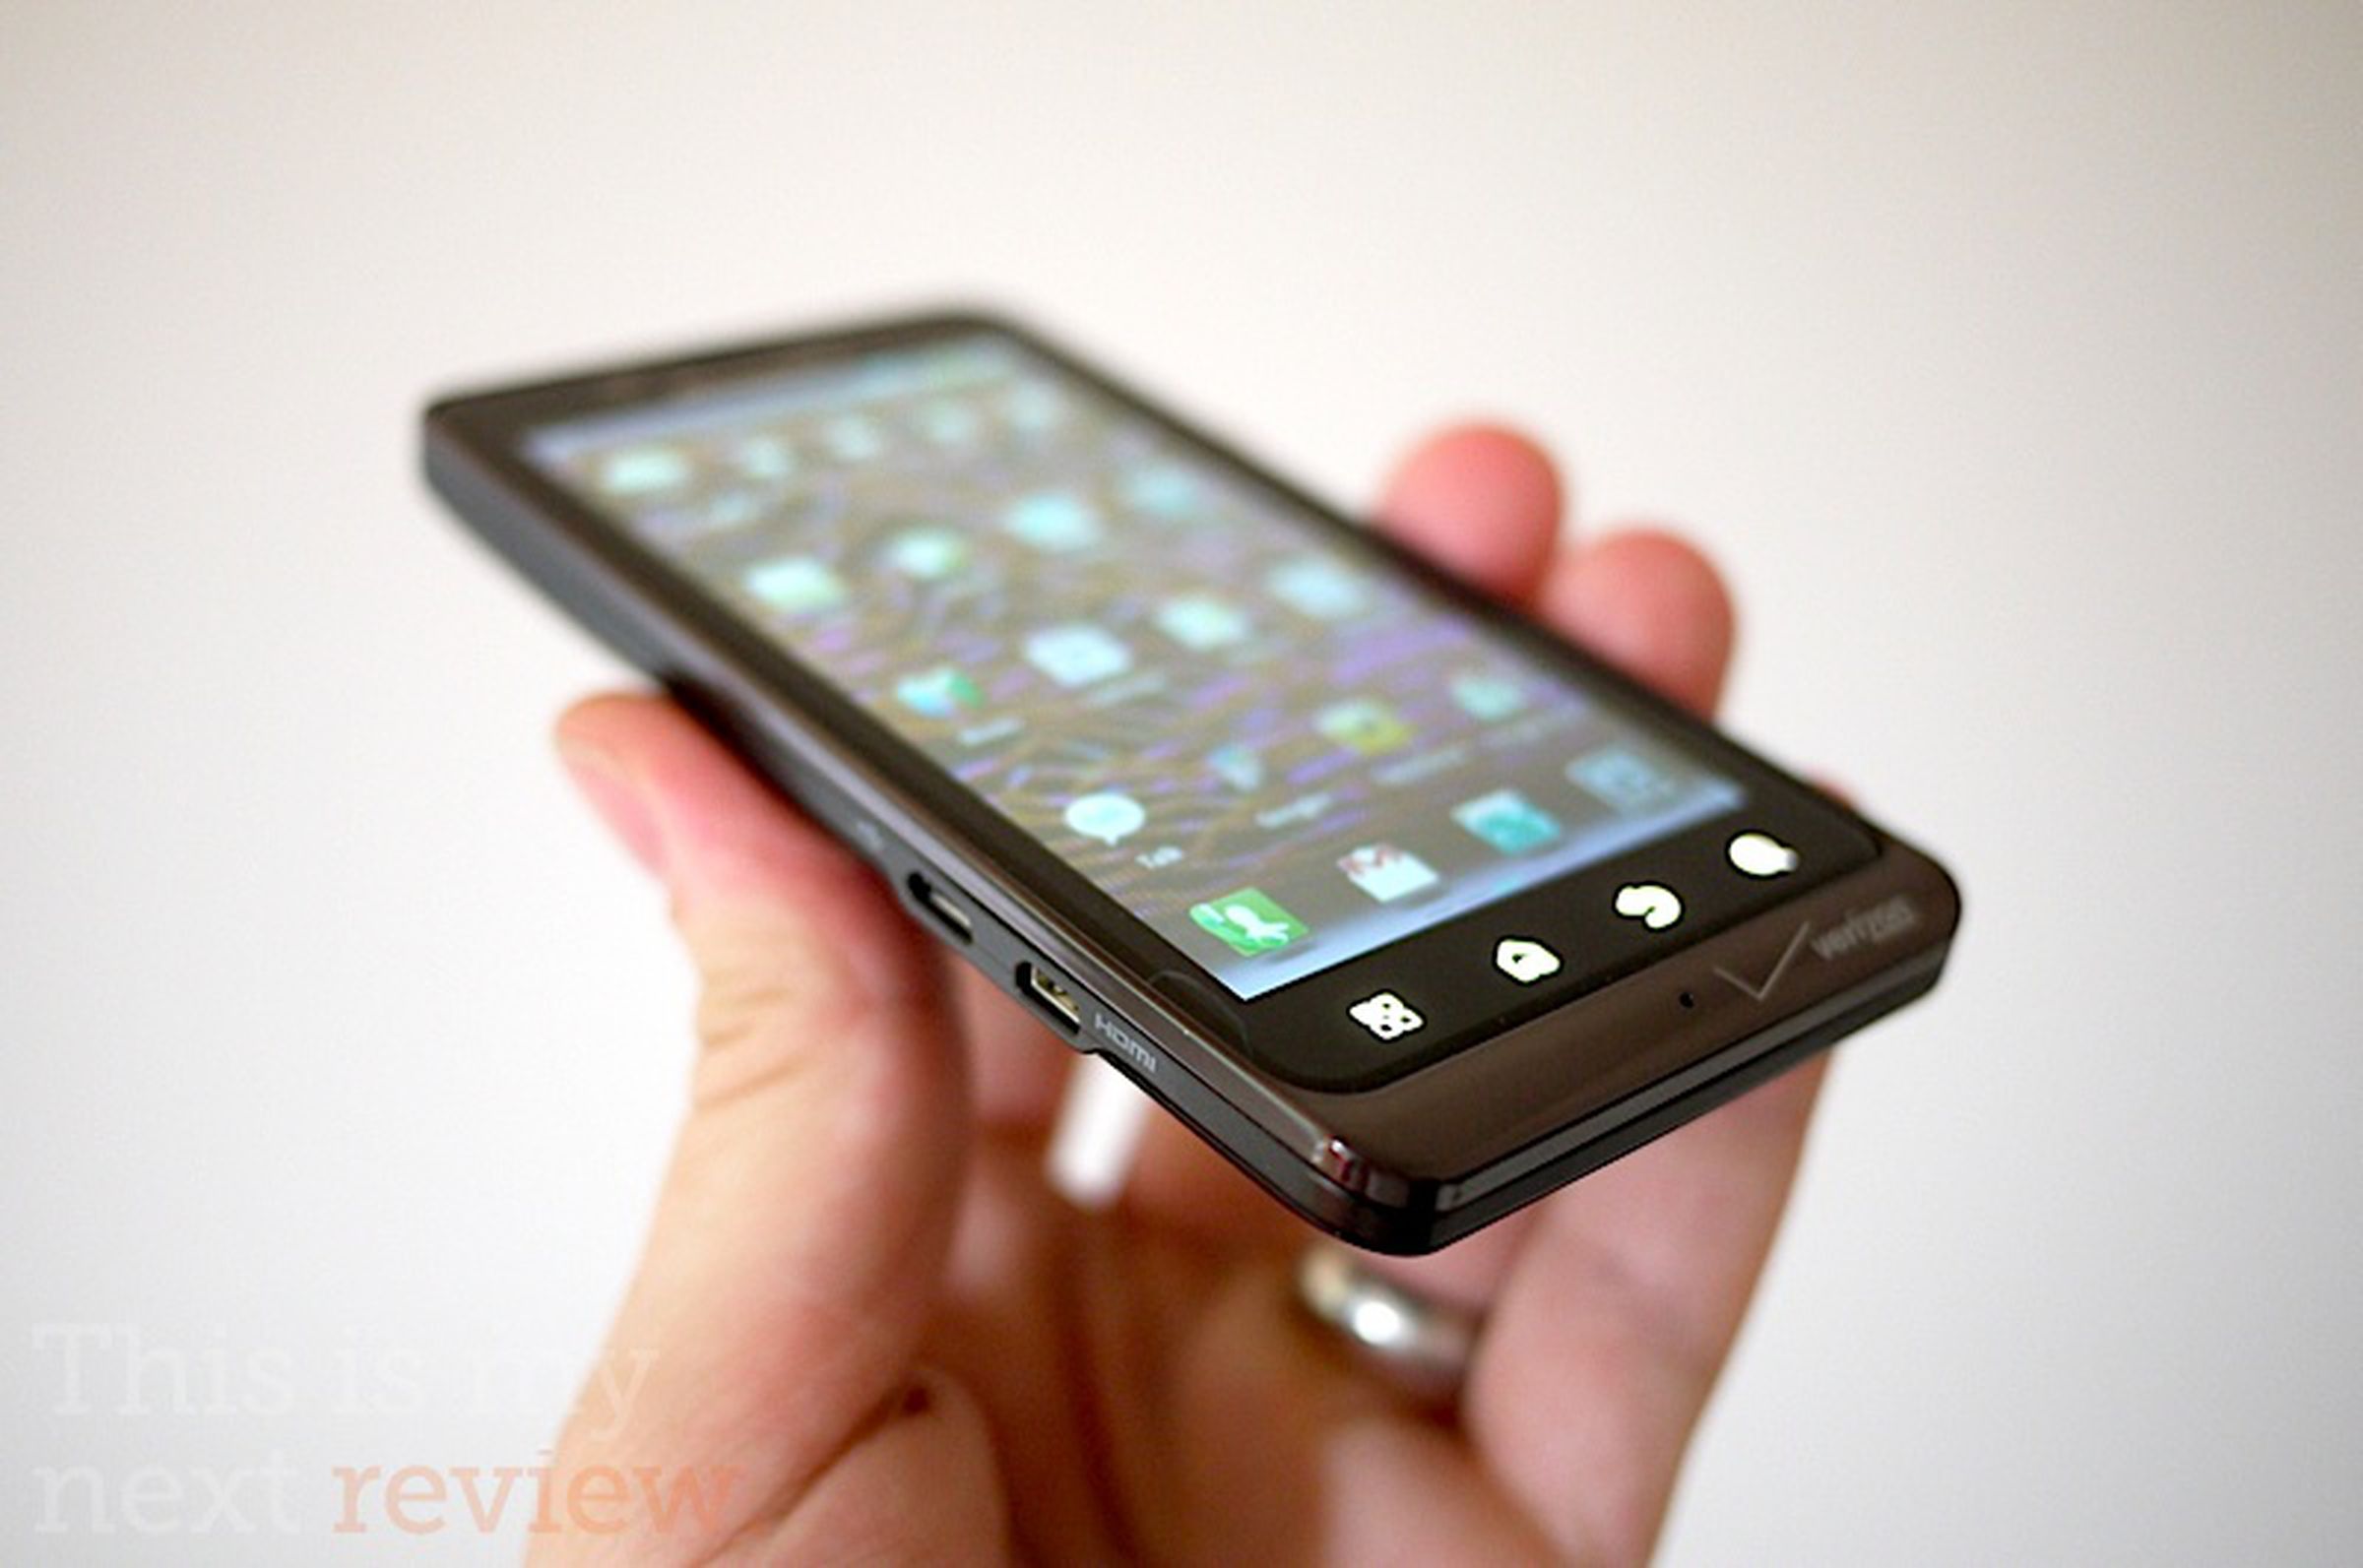 Droid Bionic review